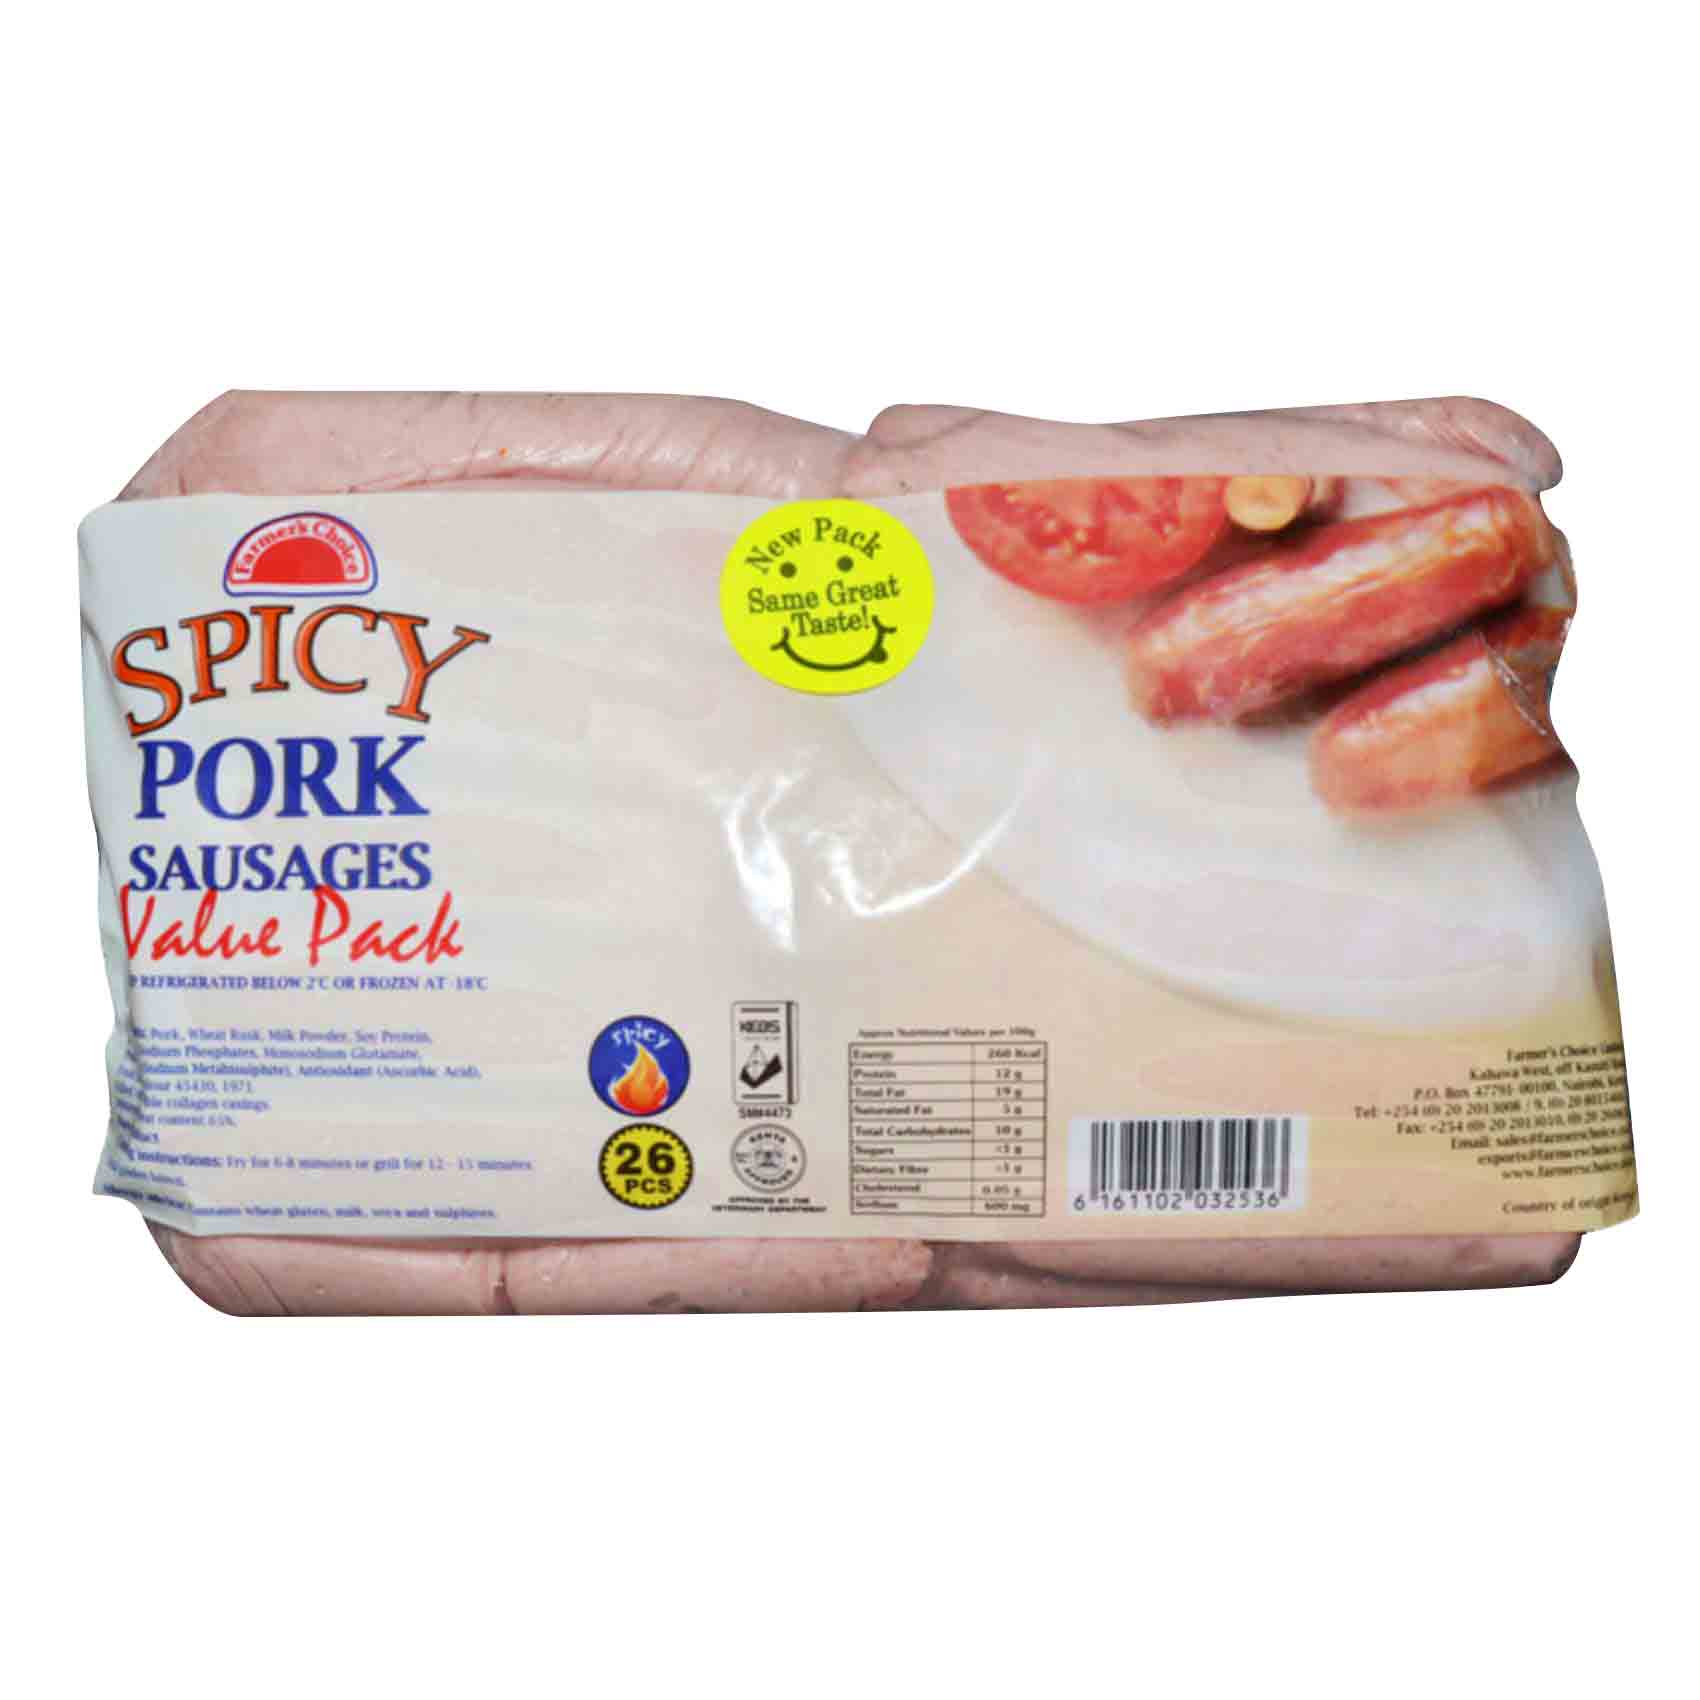 Farmers Choice Spicy Pork Sausages Value Pack 1 kg